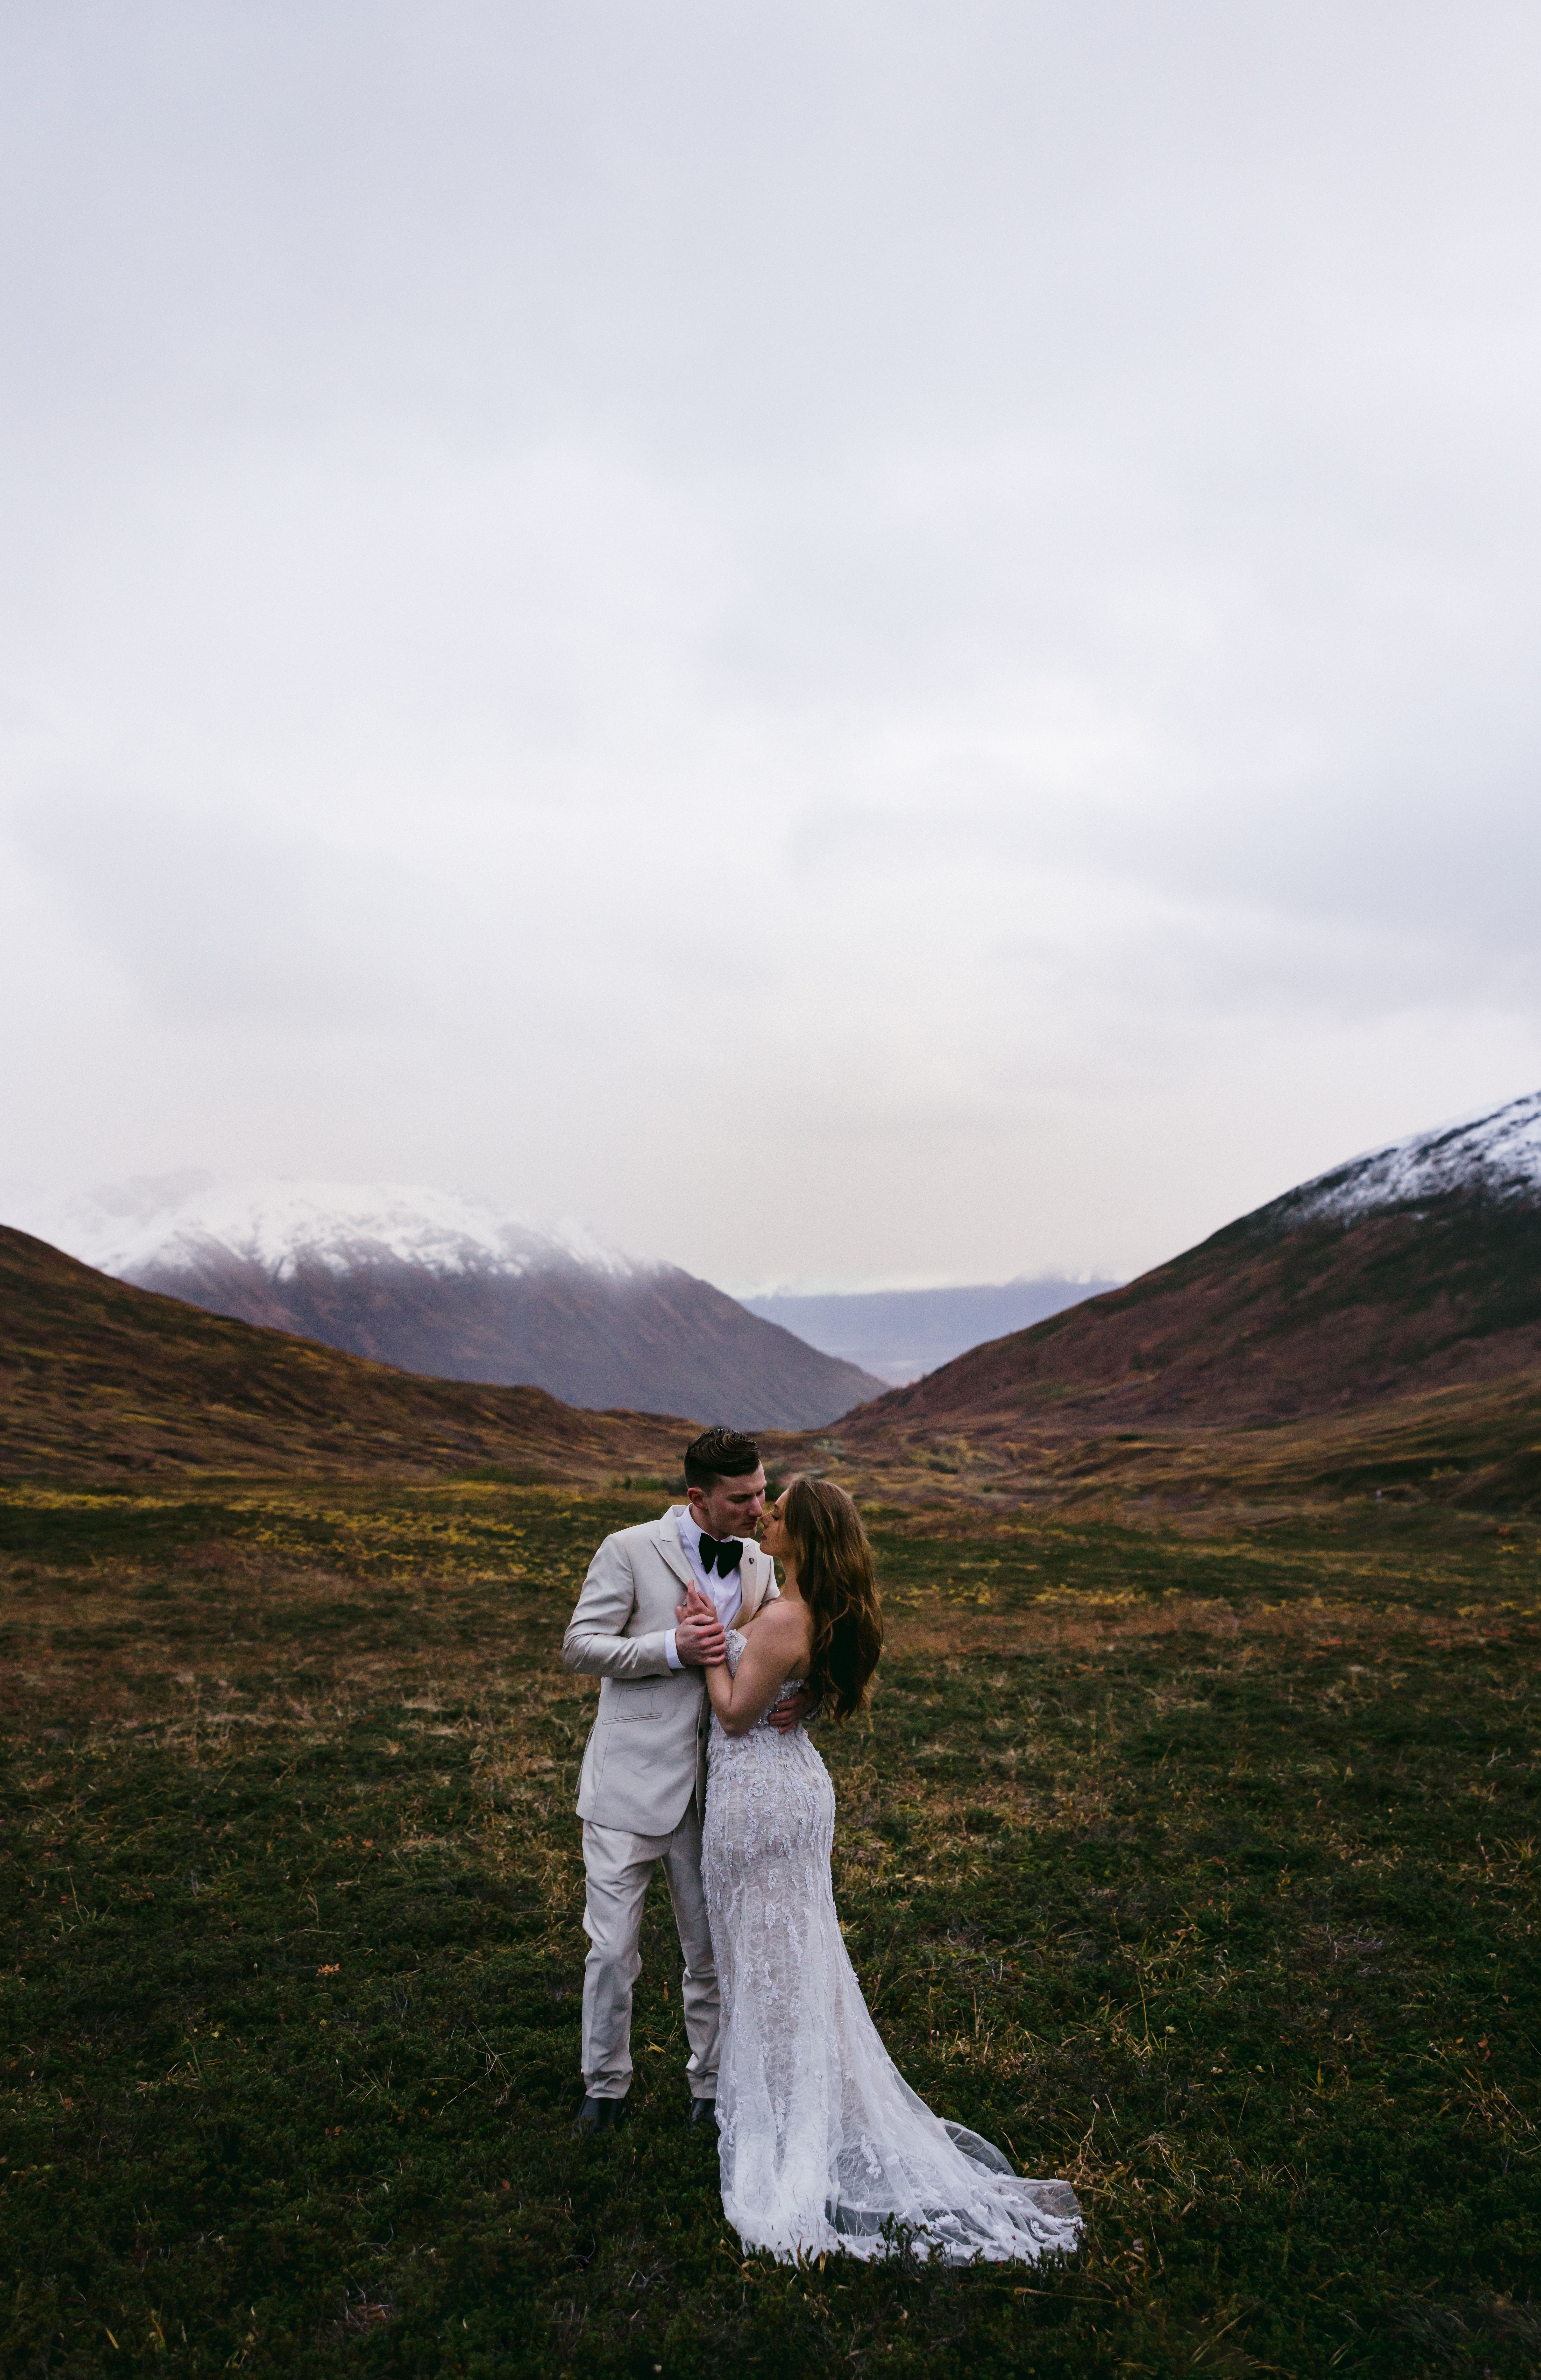 Some of the best Alaska wedding packages include helicopter tours, skiing, or snow shoeing.